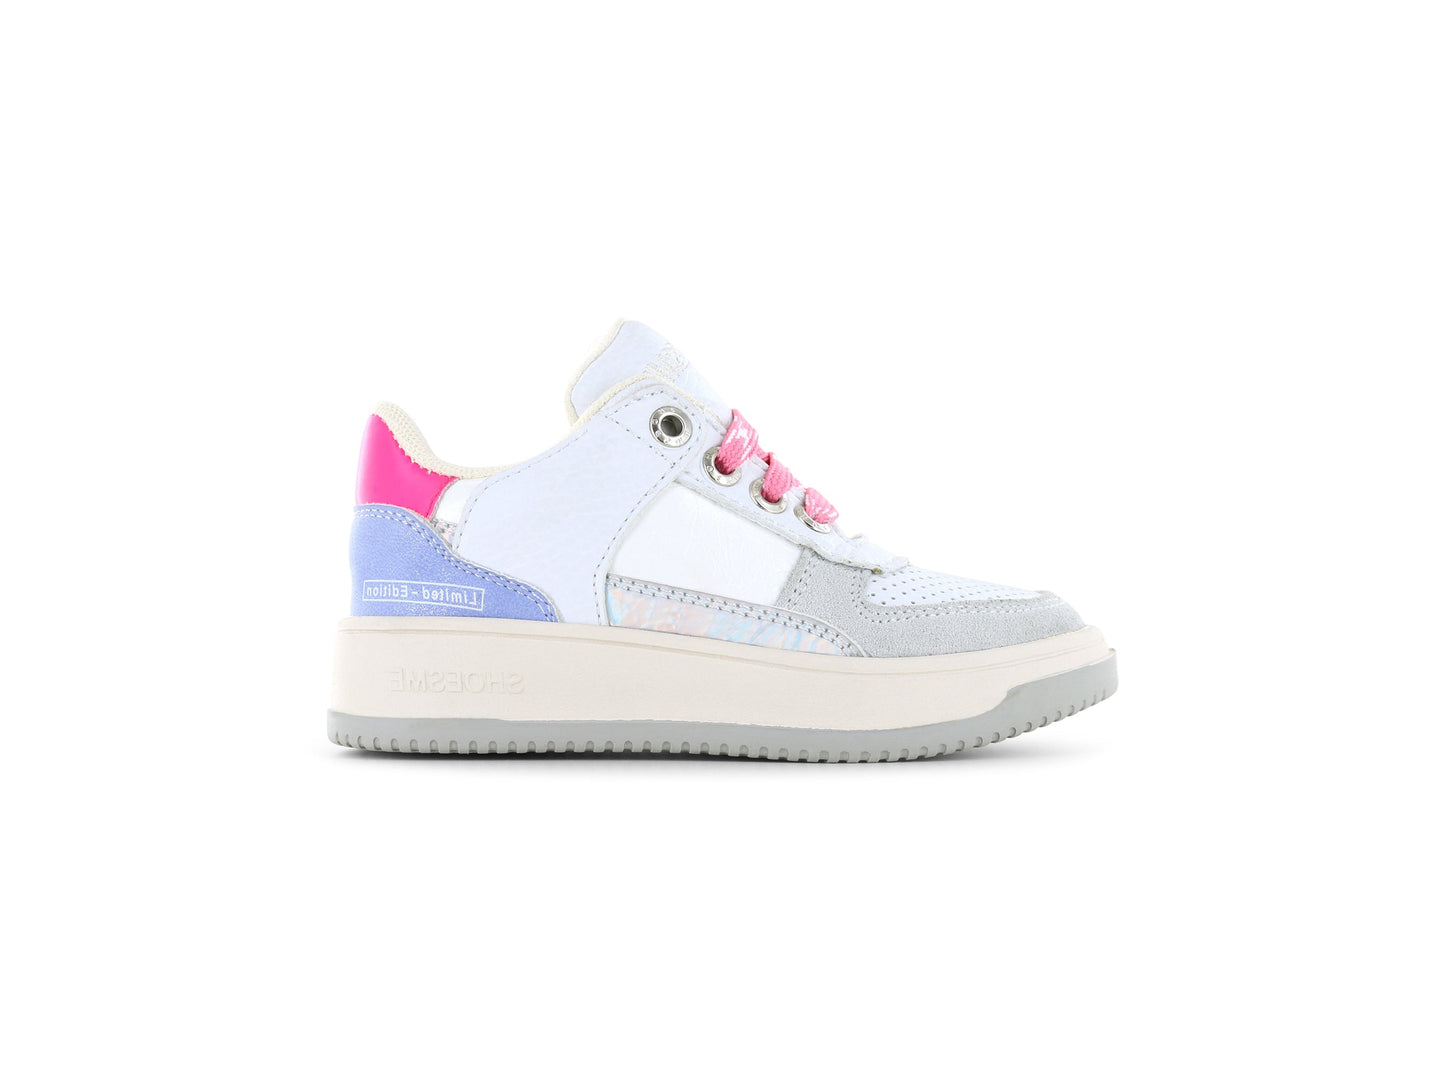 A girl's chunky trainer by Shoesme, style NO24S003-A, in white leather with pink and lilac trim set on a cream sole unit.
Pink lace and zip fastening.
Right side view.